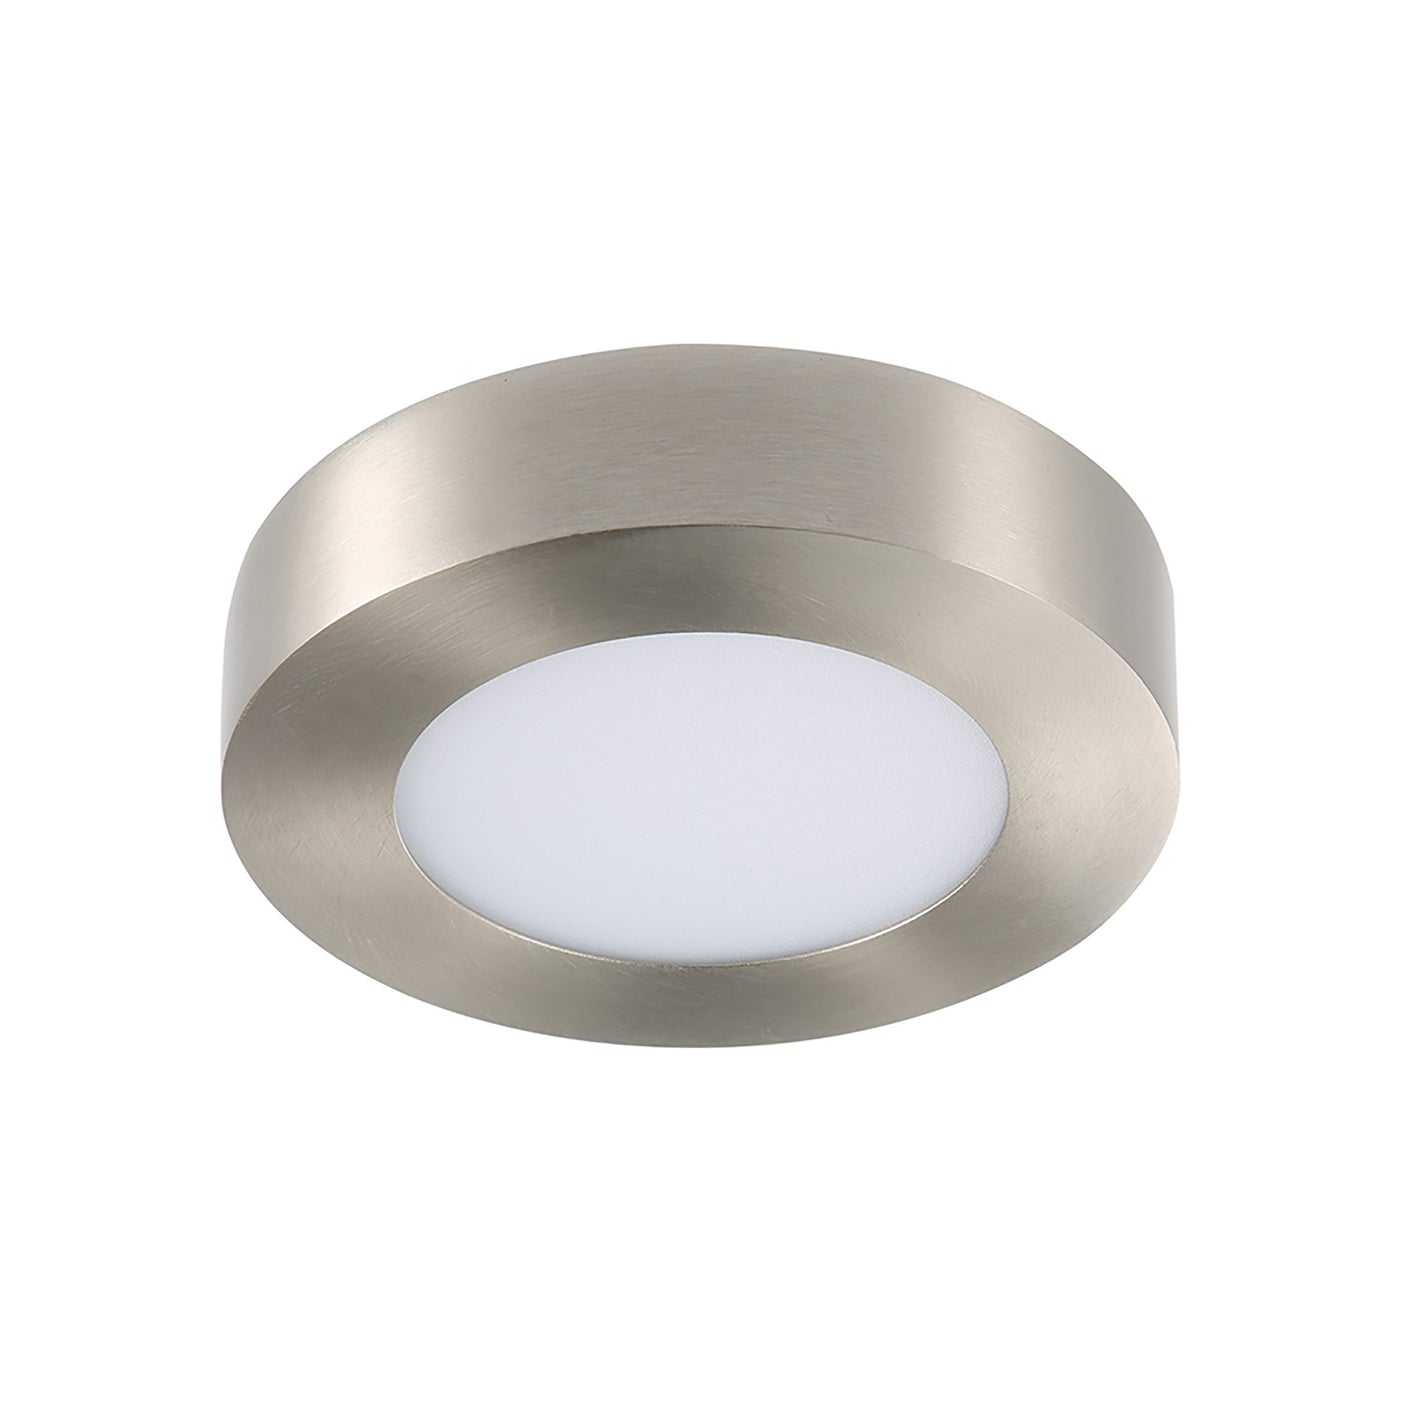 5.5 Inch 5CCT Color Selectable Surface Mount Panel Light Fixture, Brush Nickel Finish